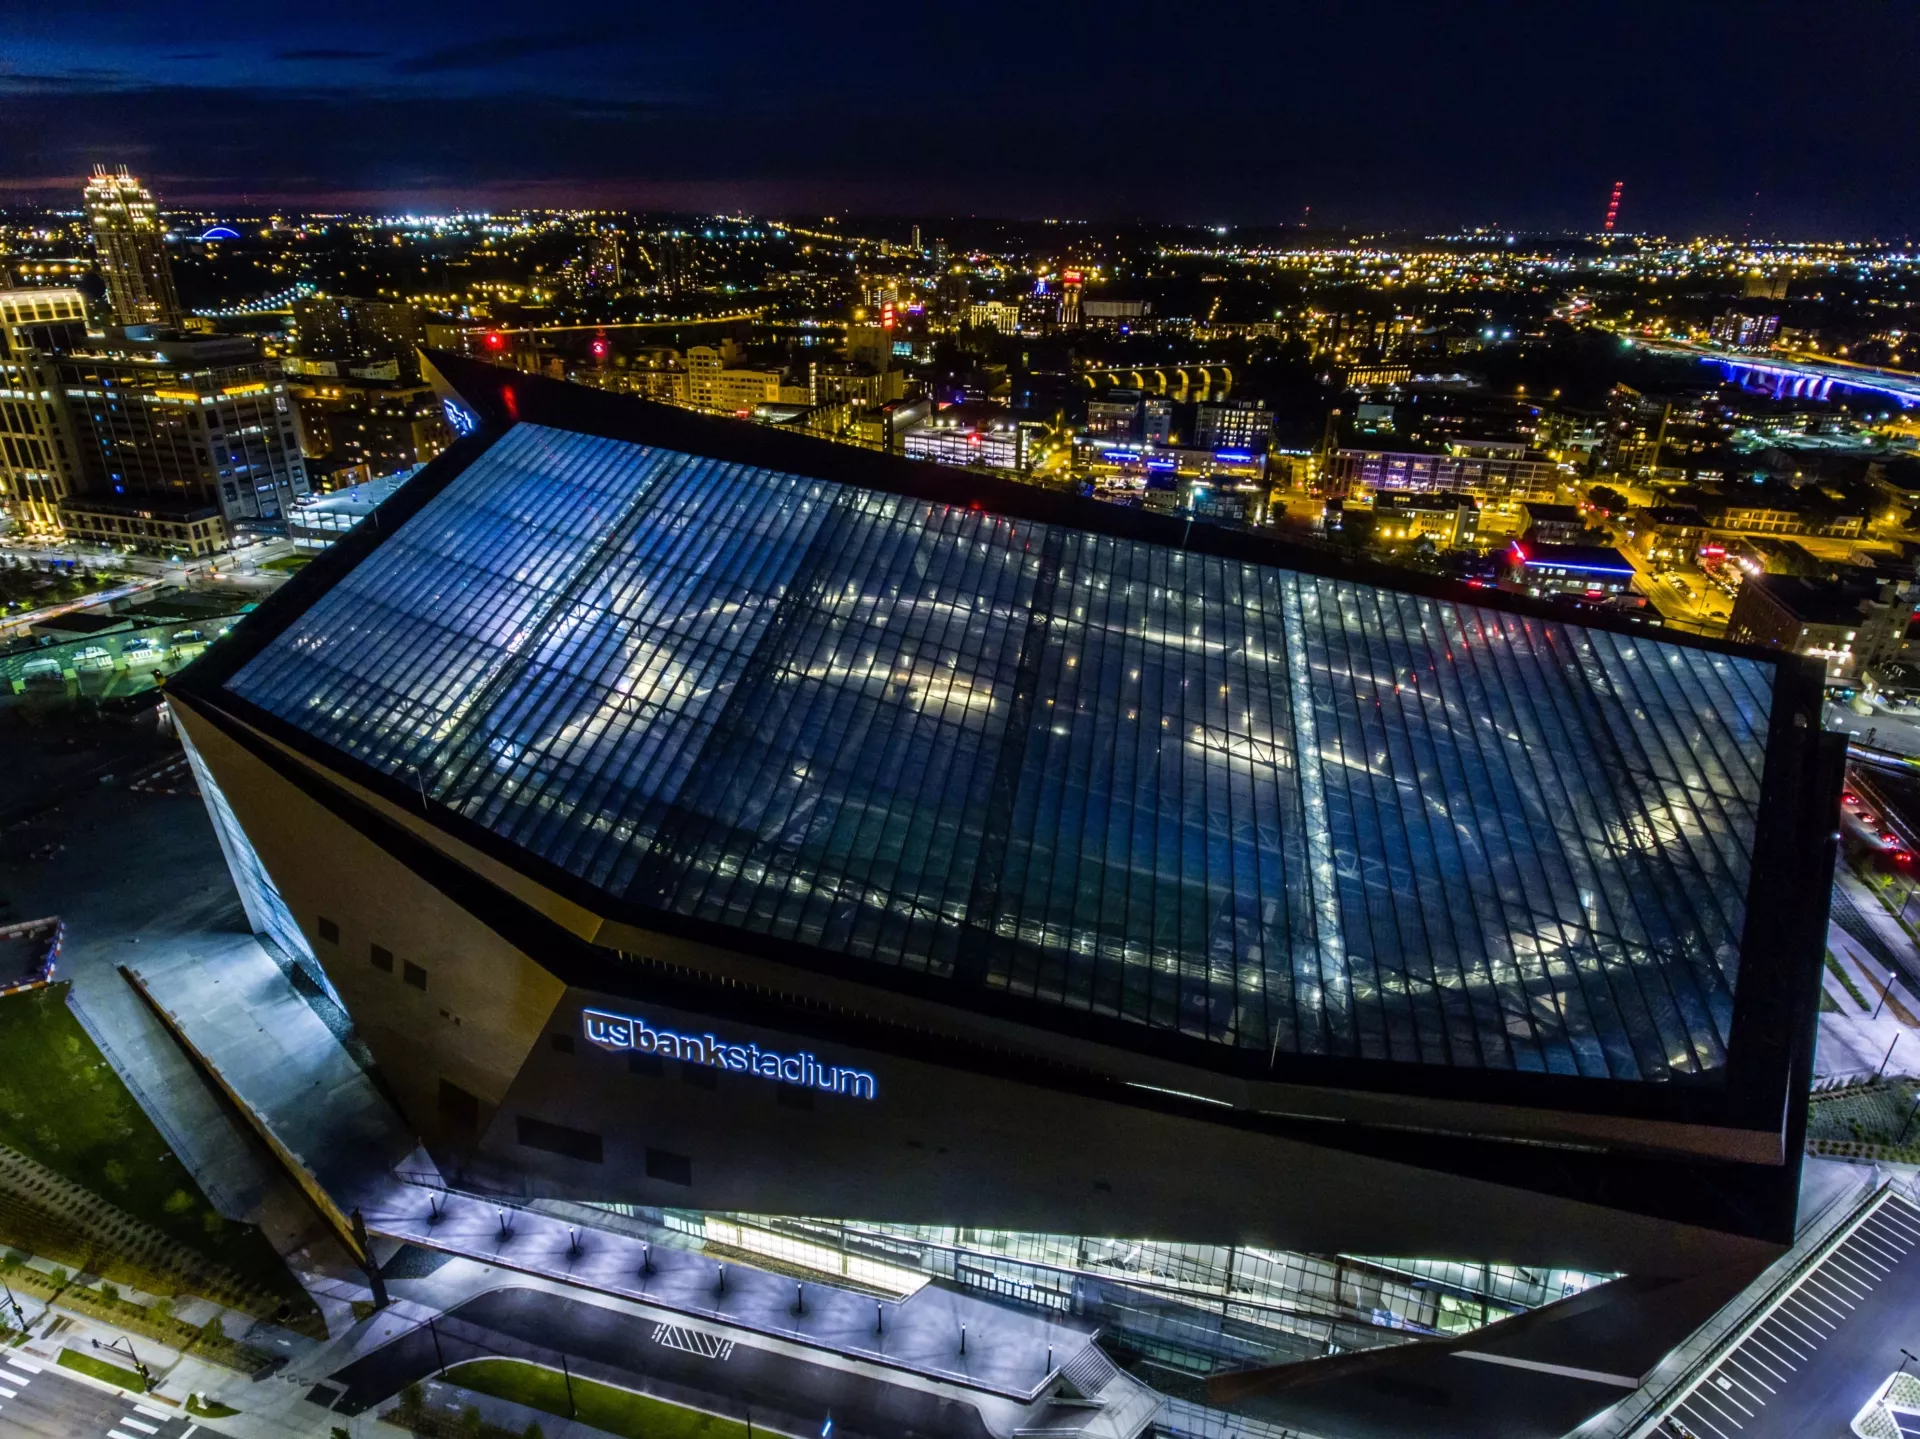 By utilizing Vector Foiltec’s transparent Texlon® ETFE foil system for 60% of the roof at U.S. Bank Stadium, sunlight comes in, but simultaneously keeps snow, rain, cold and heat out.